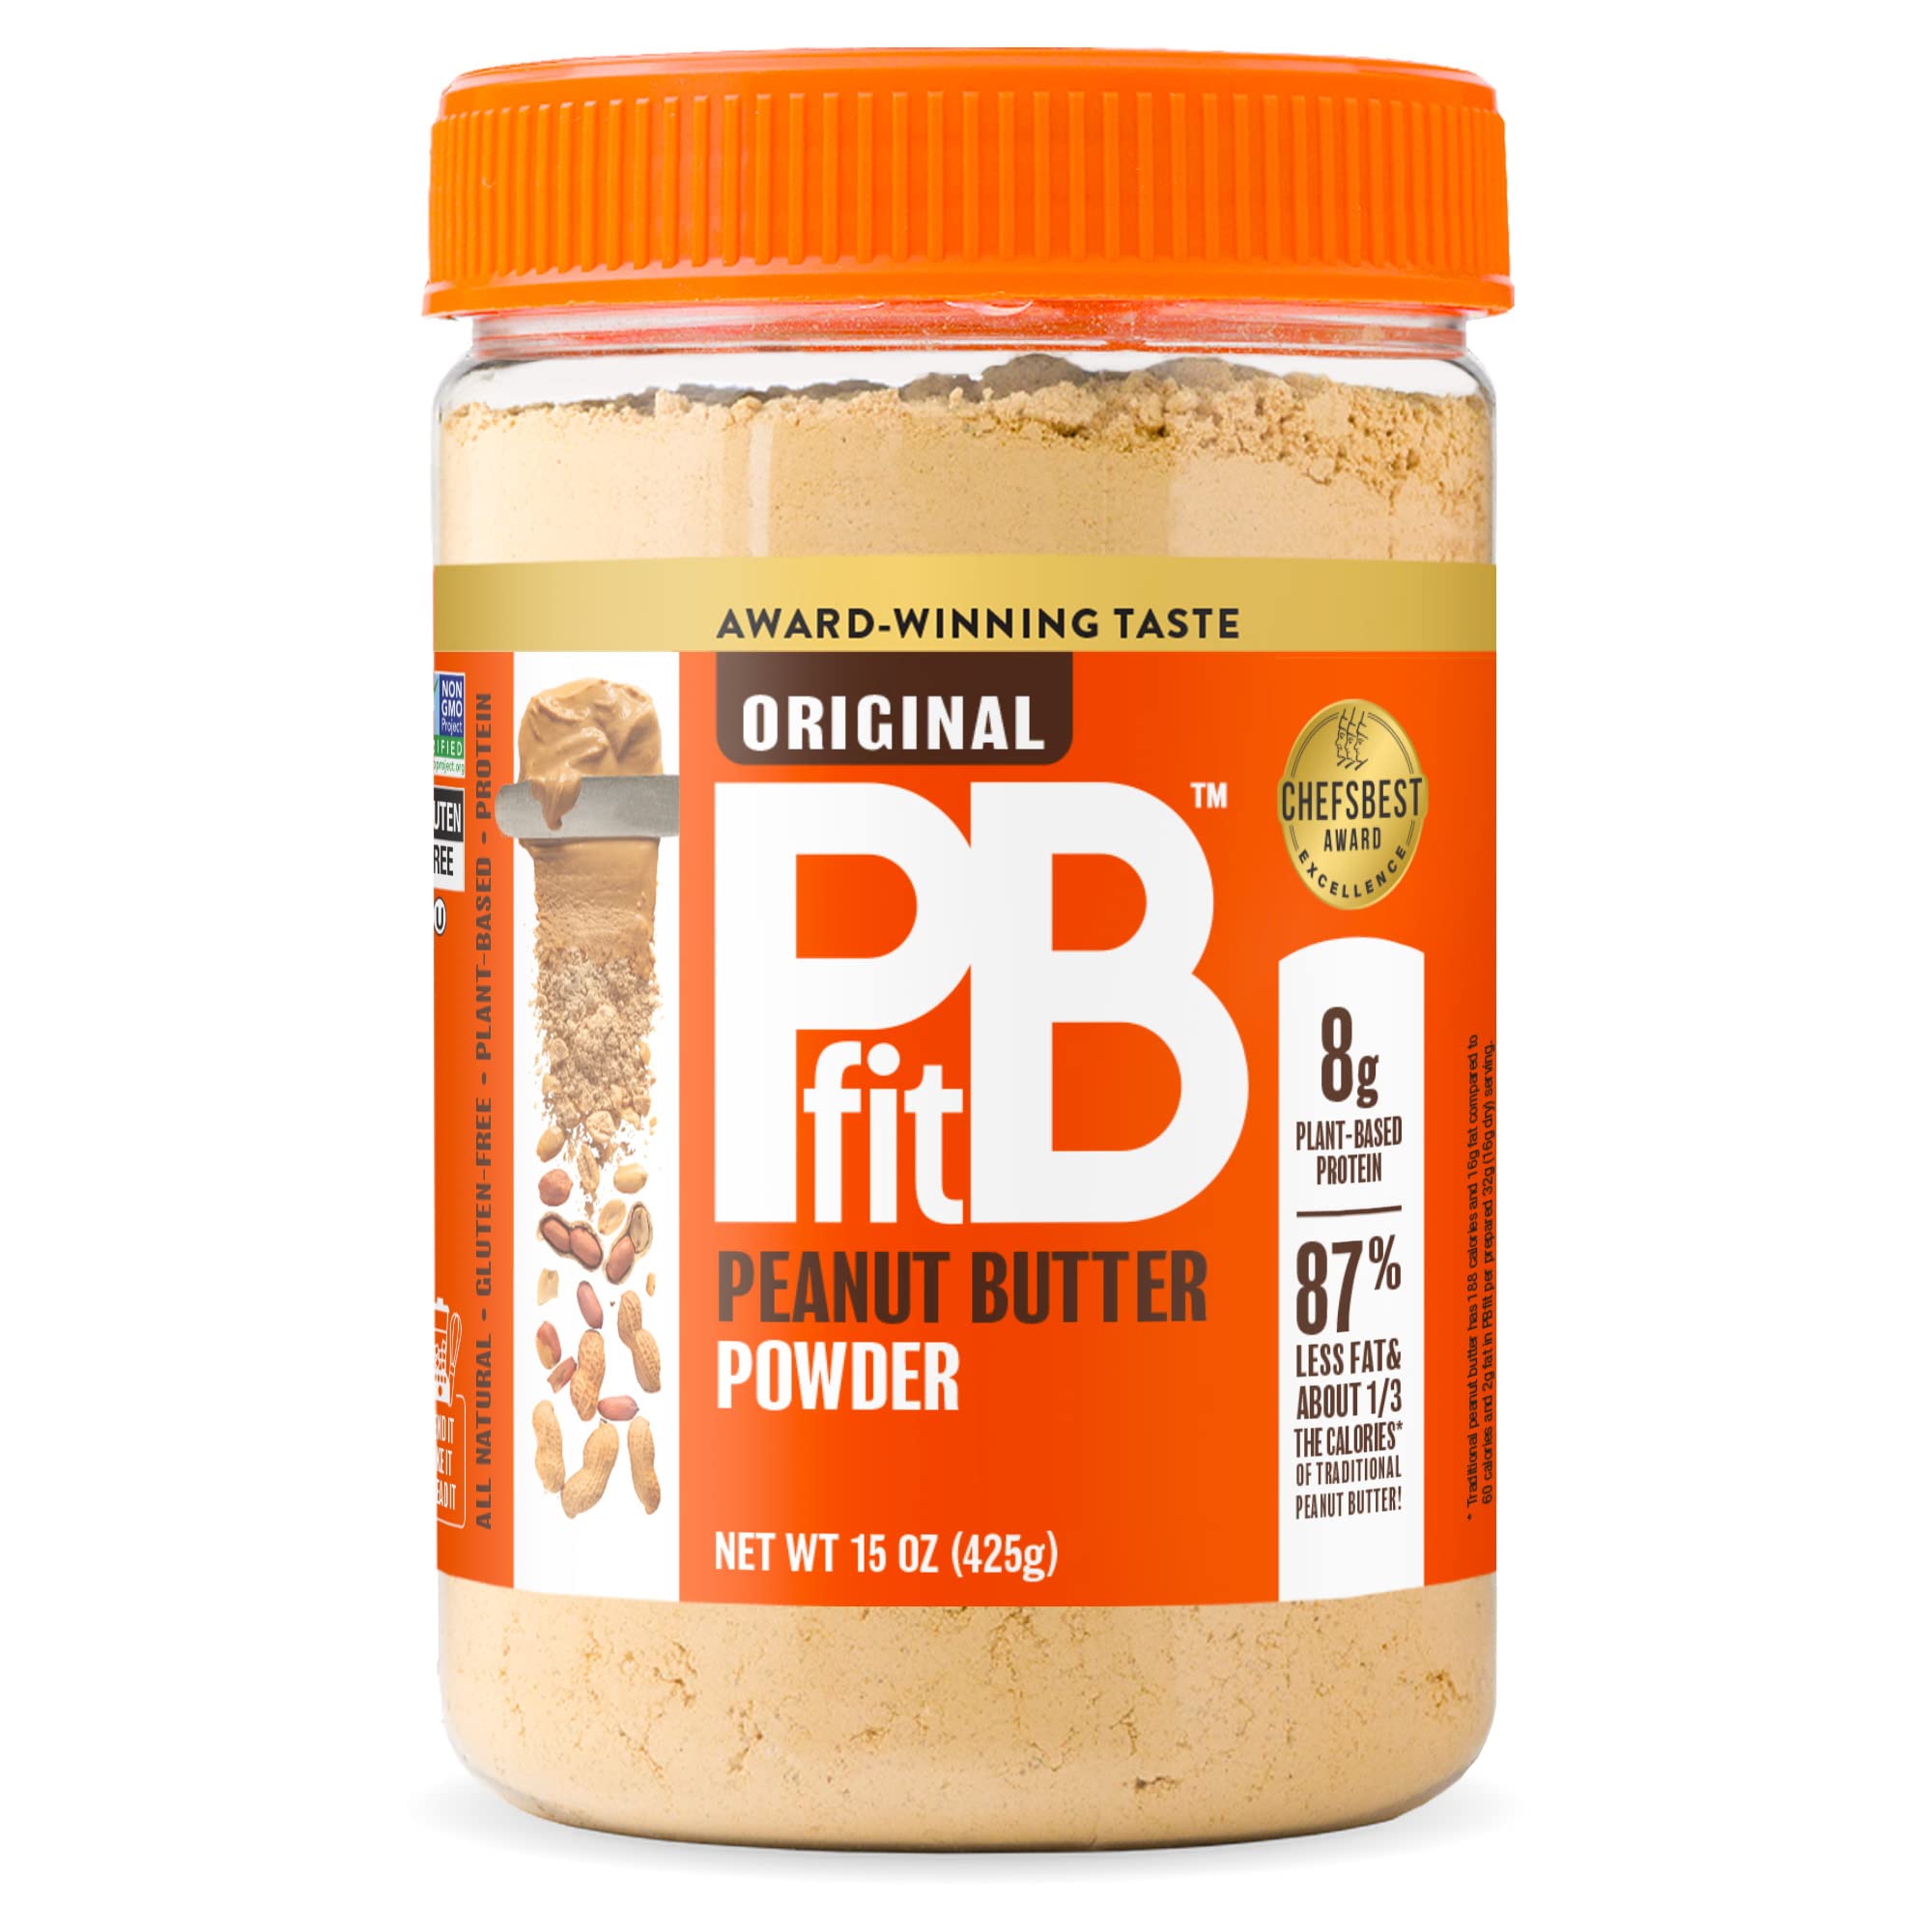 PBfit All-Natural Peanut Butter Powder, Peanut Butter Powder from Real Roasted Pressed Peanuts, 8g of Protein 8% DV (15 oz.) - $5.99